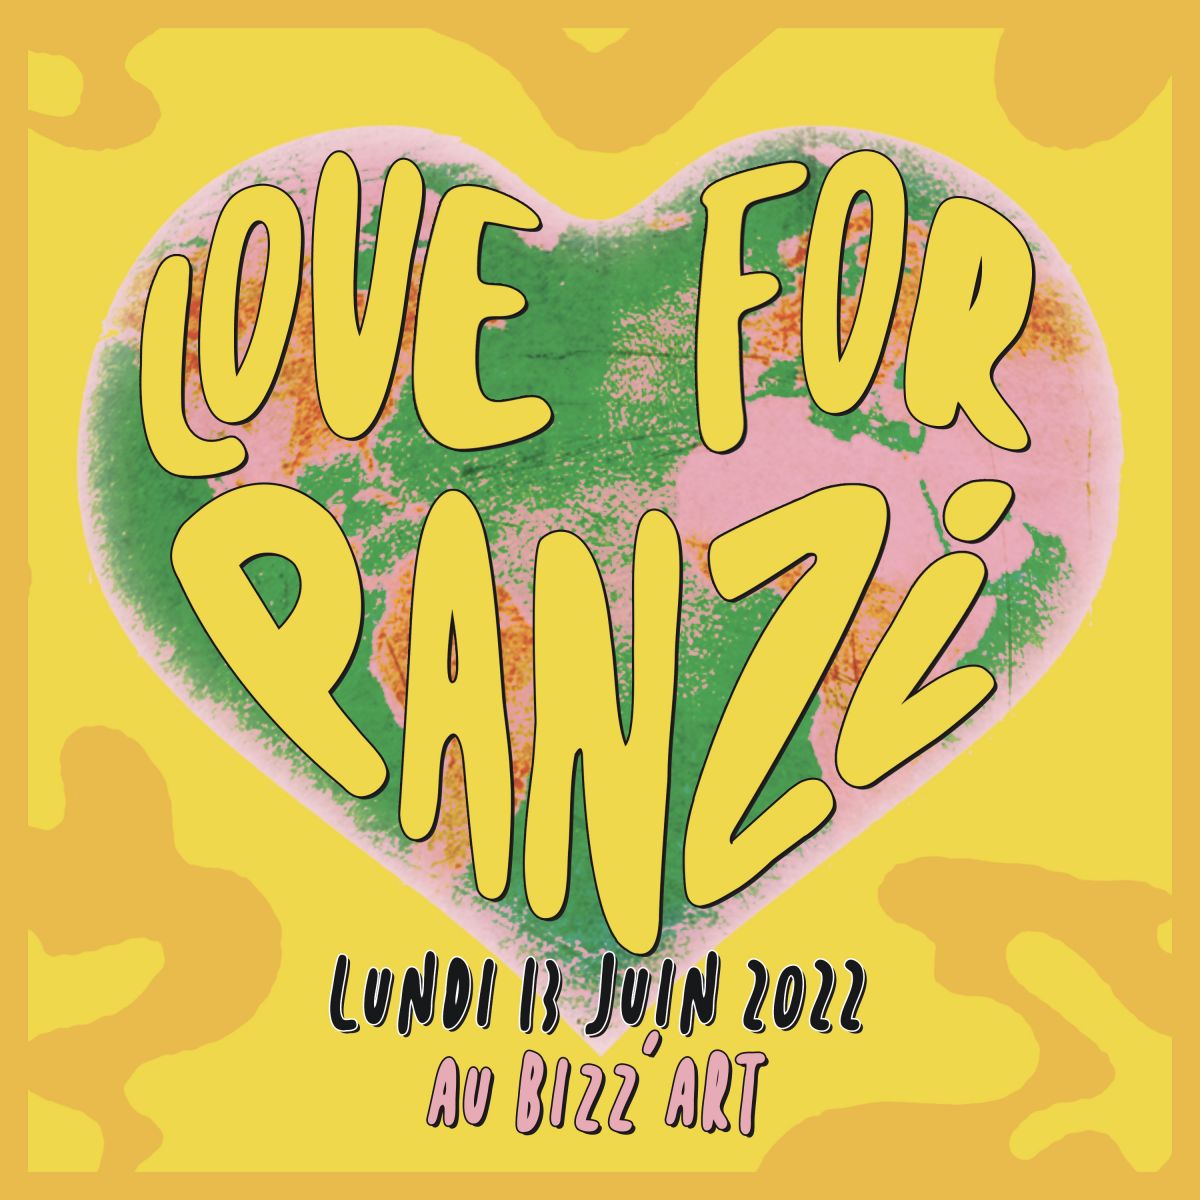 LOVE FOR PANZI, concert solidaire!!